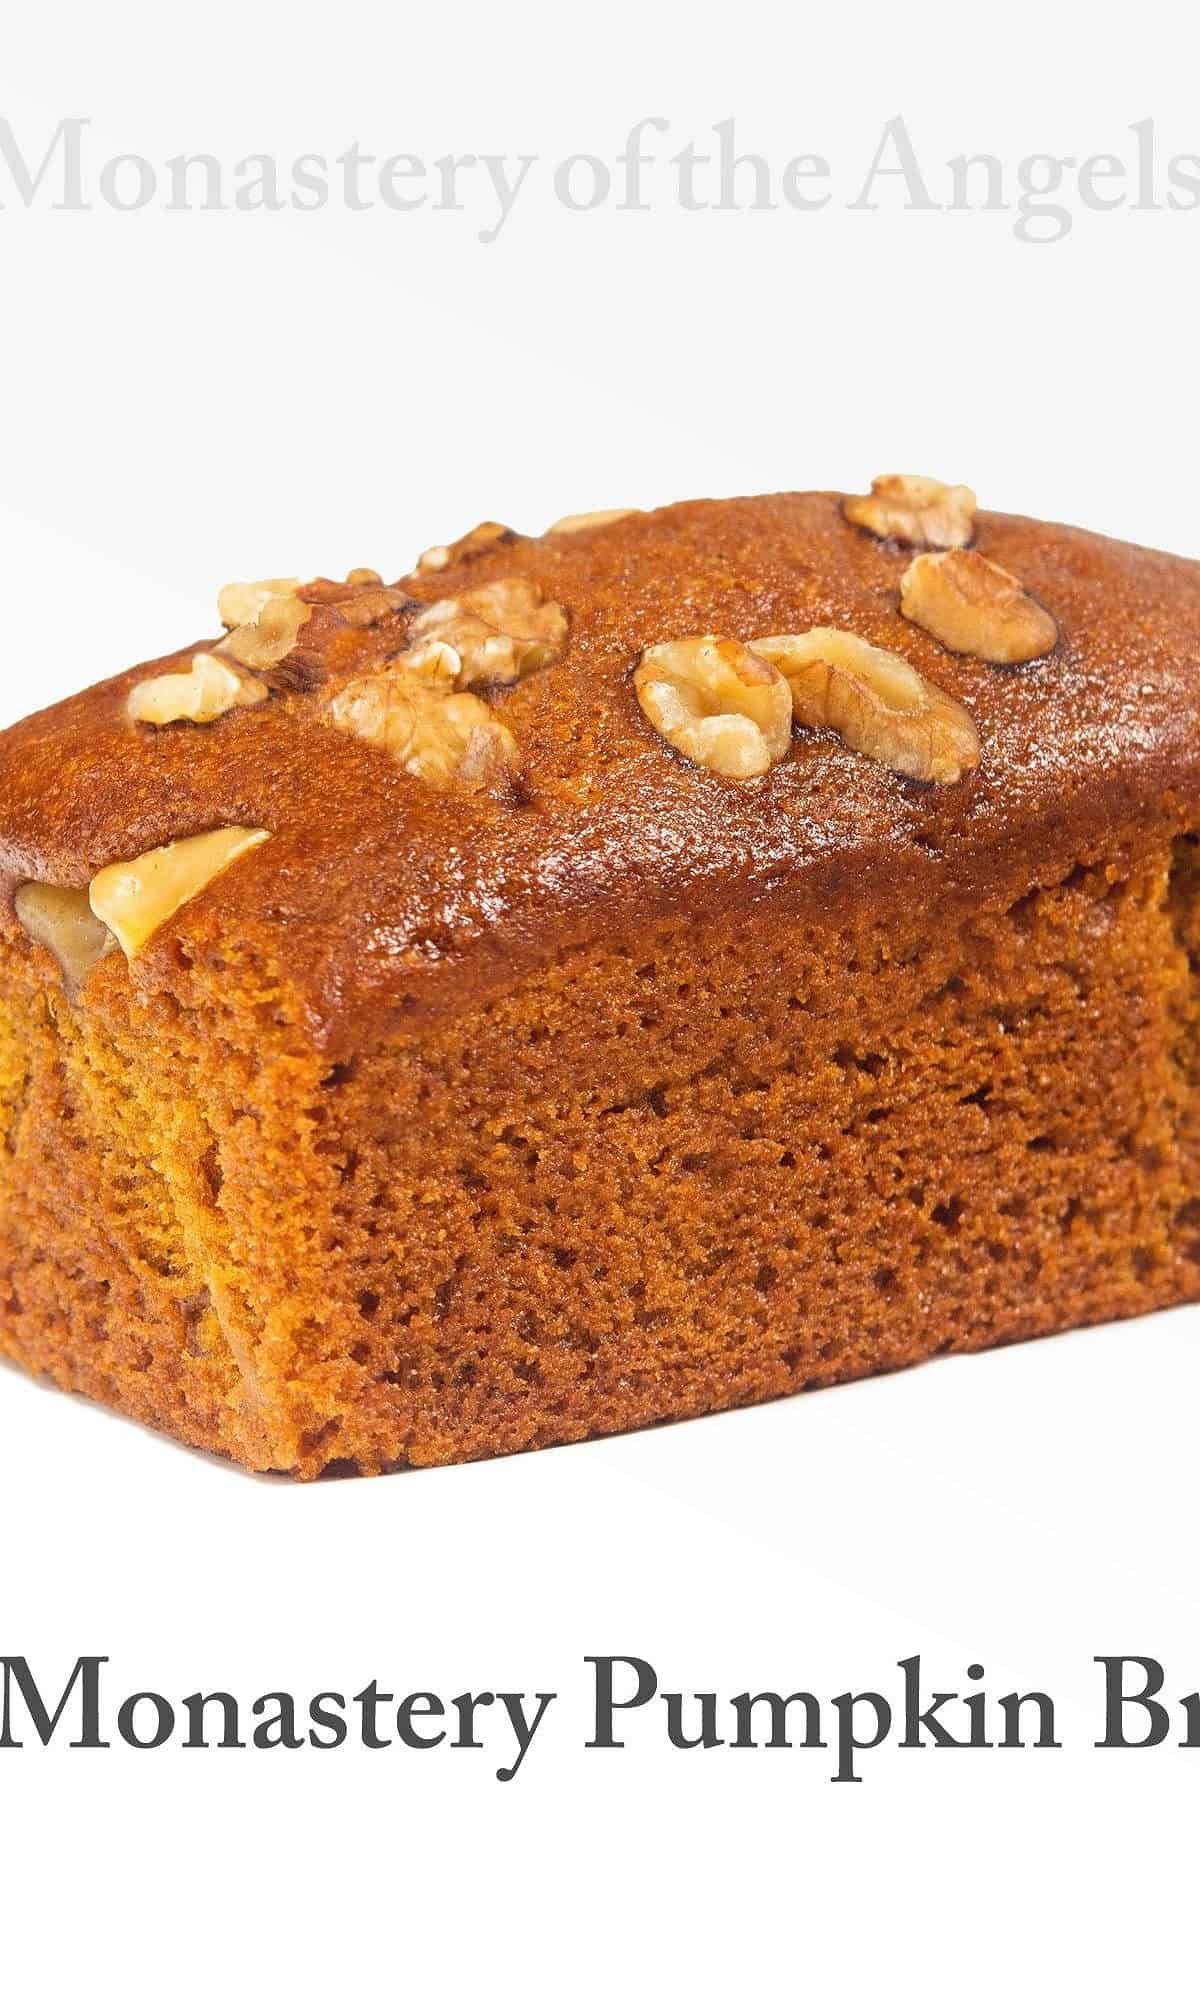  A generous slice of pumpkin bread with a dollop of whipped cream makes for the perfect dessert.